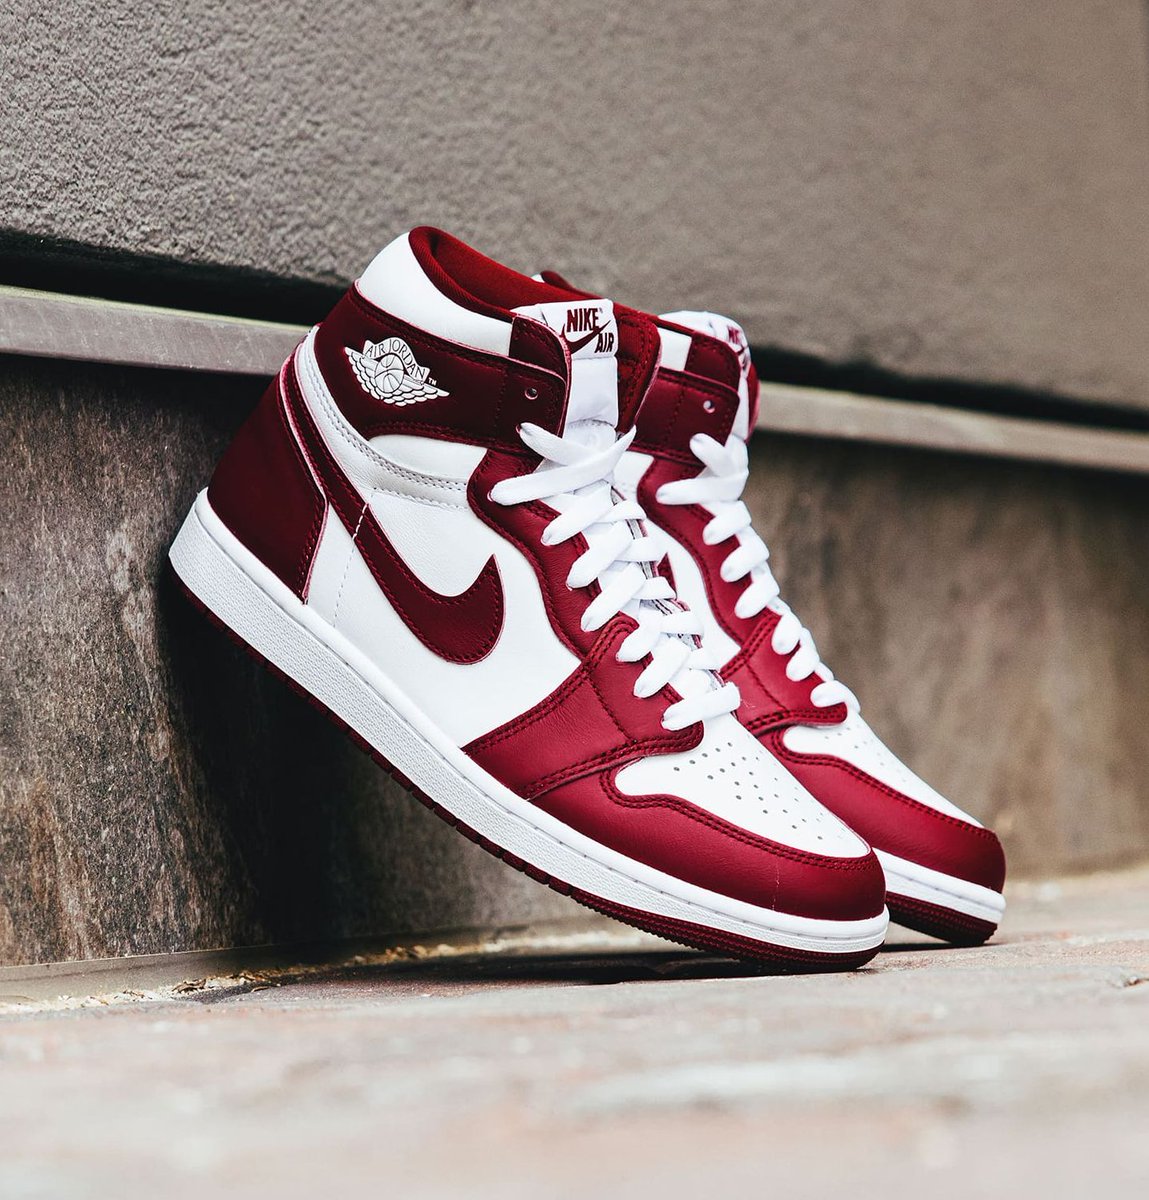 LOWEST PRICE YET 🔥 40% OFF + free shipping on the Air Jordan 1 High OG 'Artisanal Red' BUY HERE: bit.ly/4bjcZEZ